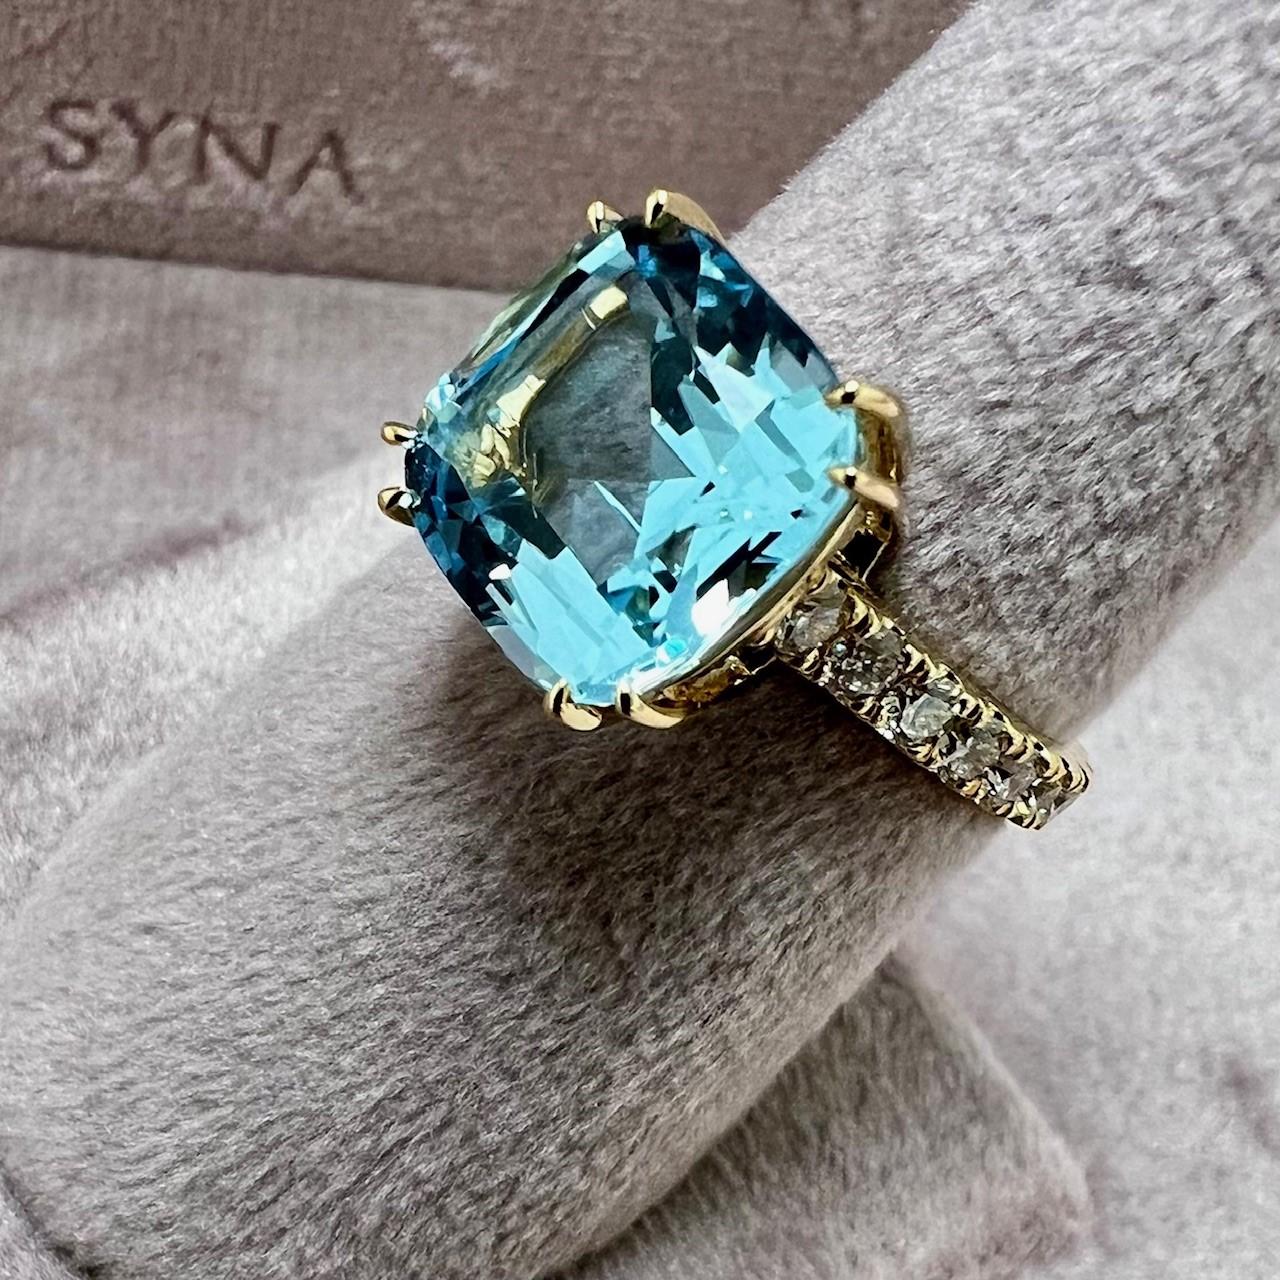 Created in 18 karat yellow gold
Blue Topaz 5 carats approx.
Diamonds 0.80 carat approx.
Ring size US 6.5, can be sized
Limited edition


About the Designers ~ Dharmesh & Namrata

Drawing inspiration from little things, Dharmesh & Namrata Kothari